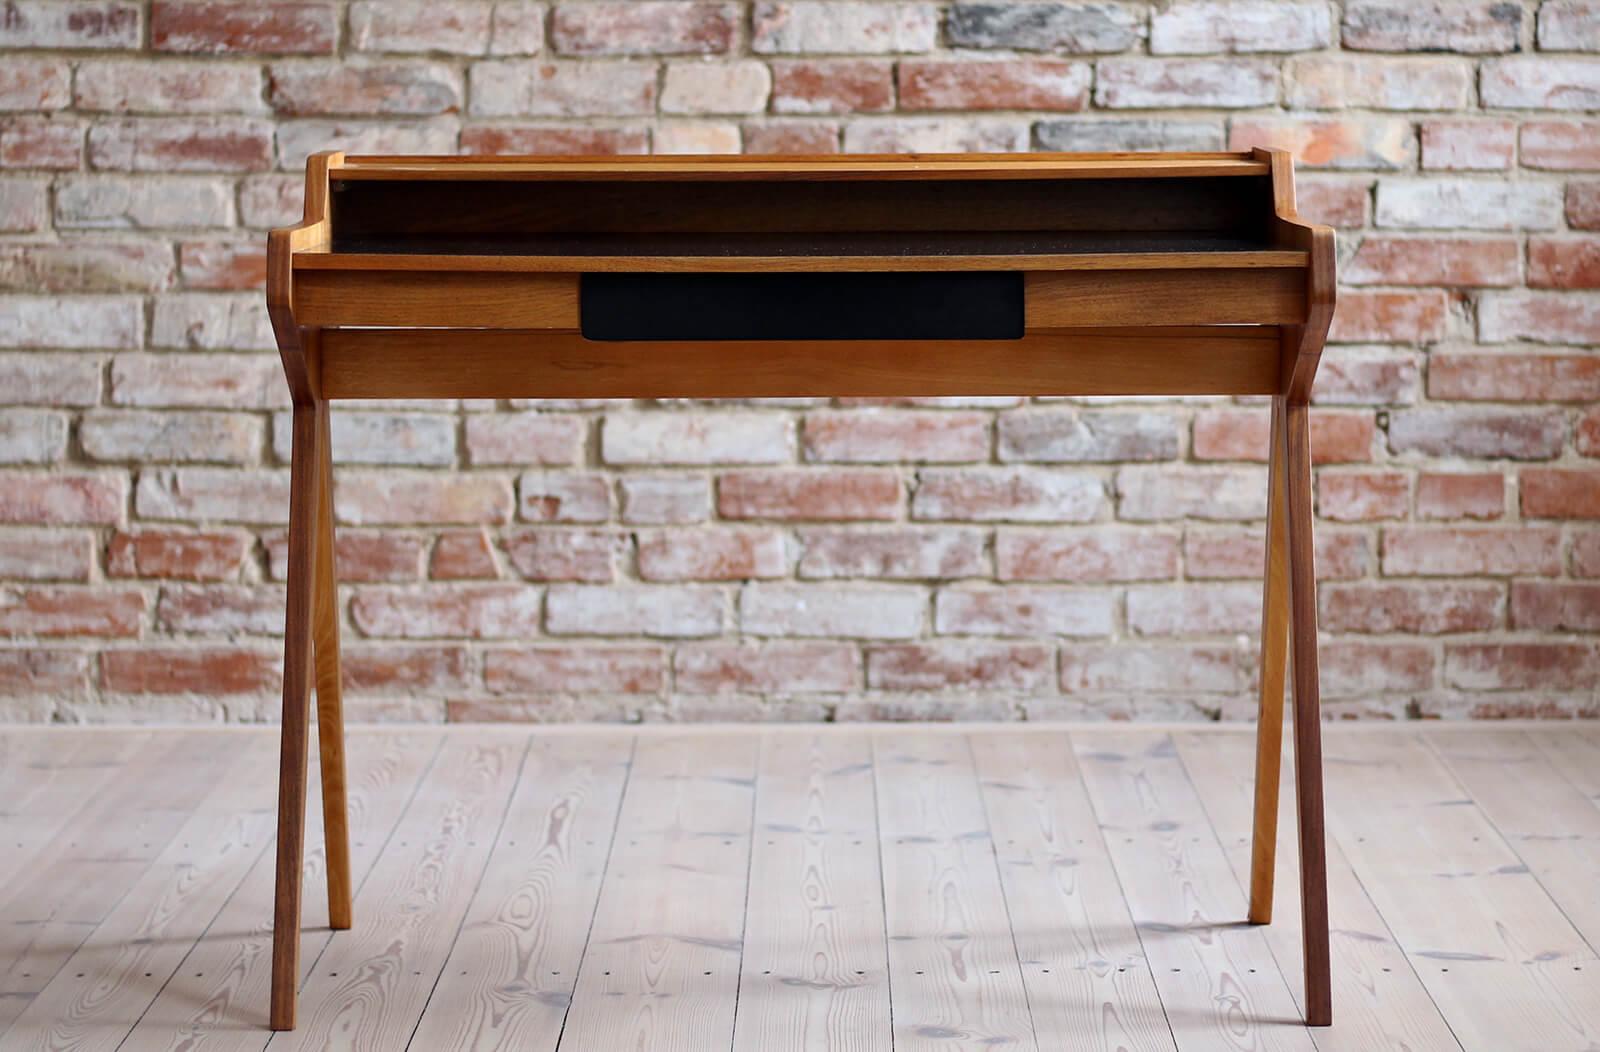 This is the famous desk designed by Helmut Magg, also known as 